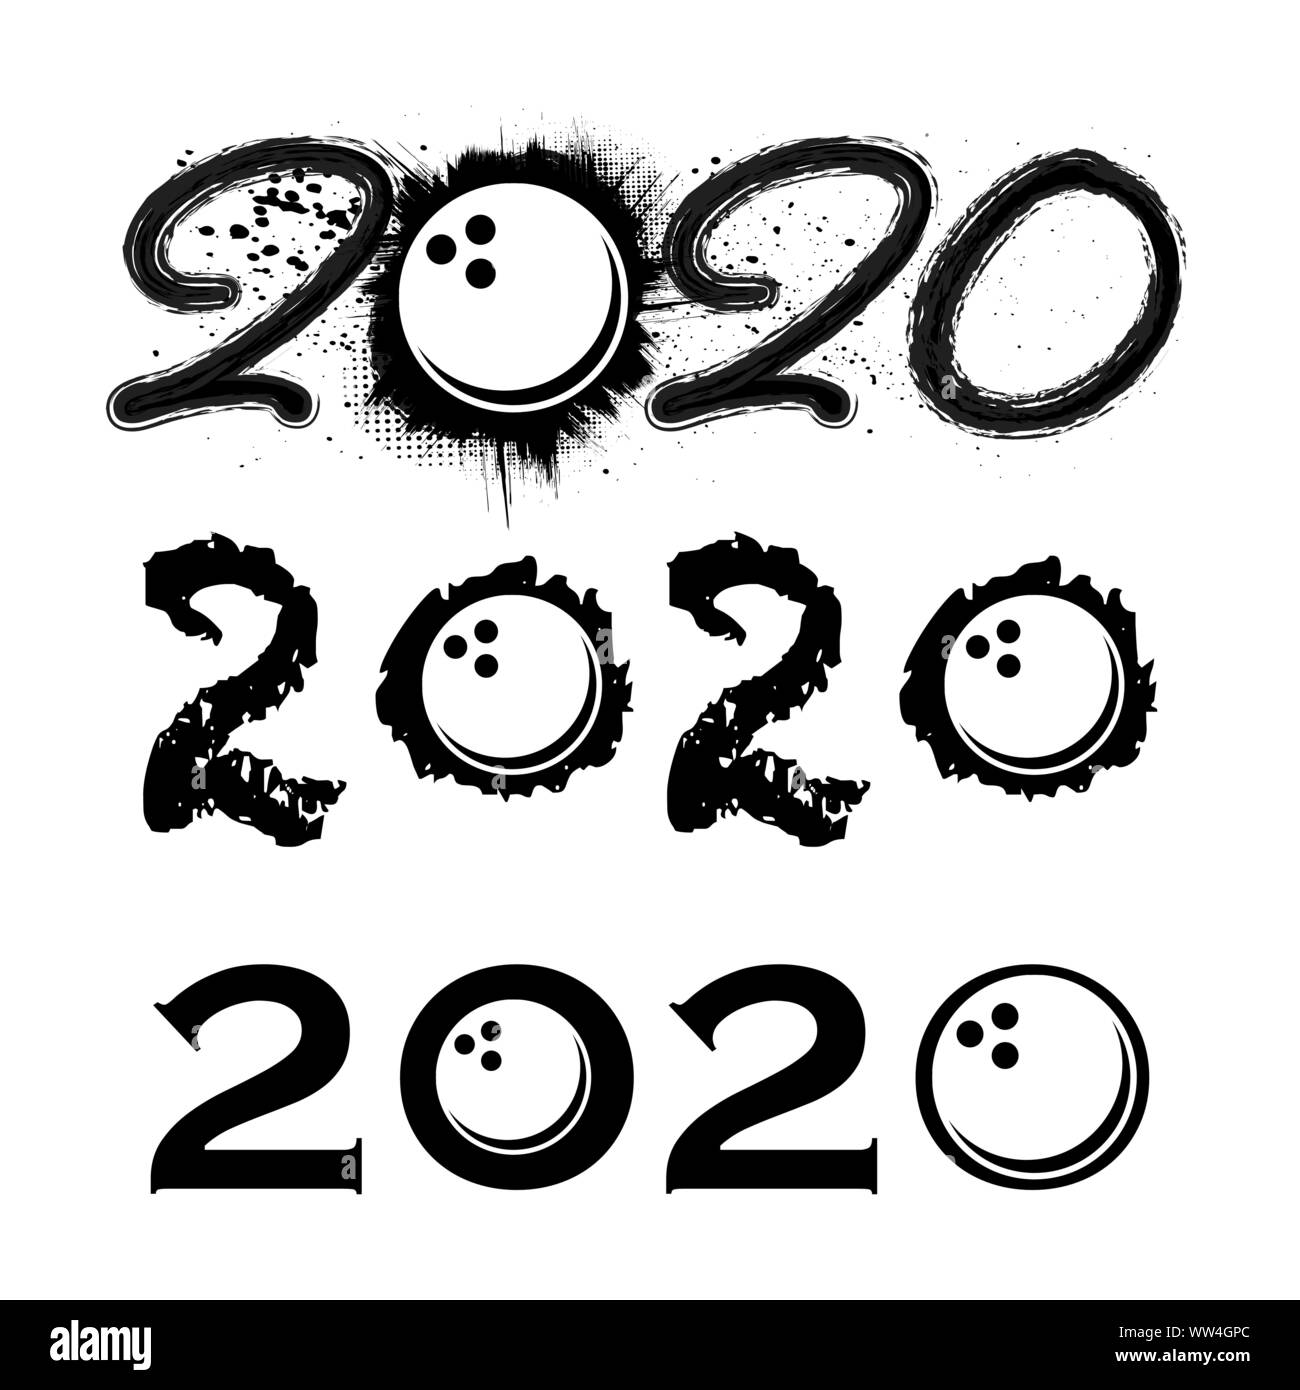 Three black grunge 2020 numbers with bowling balls Stock Vector